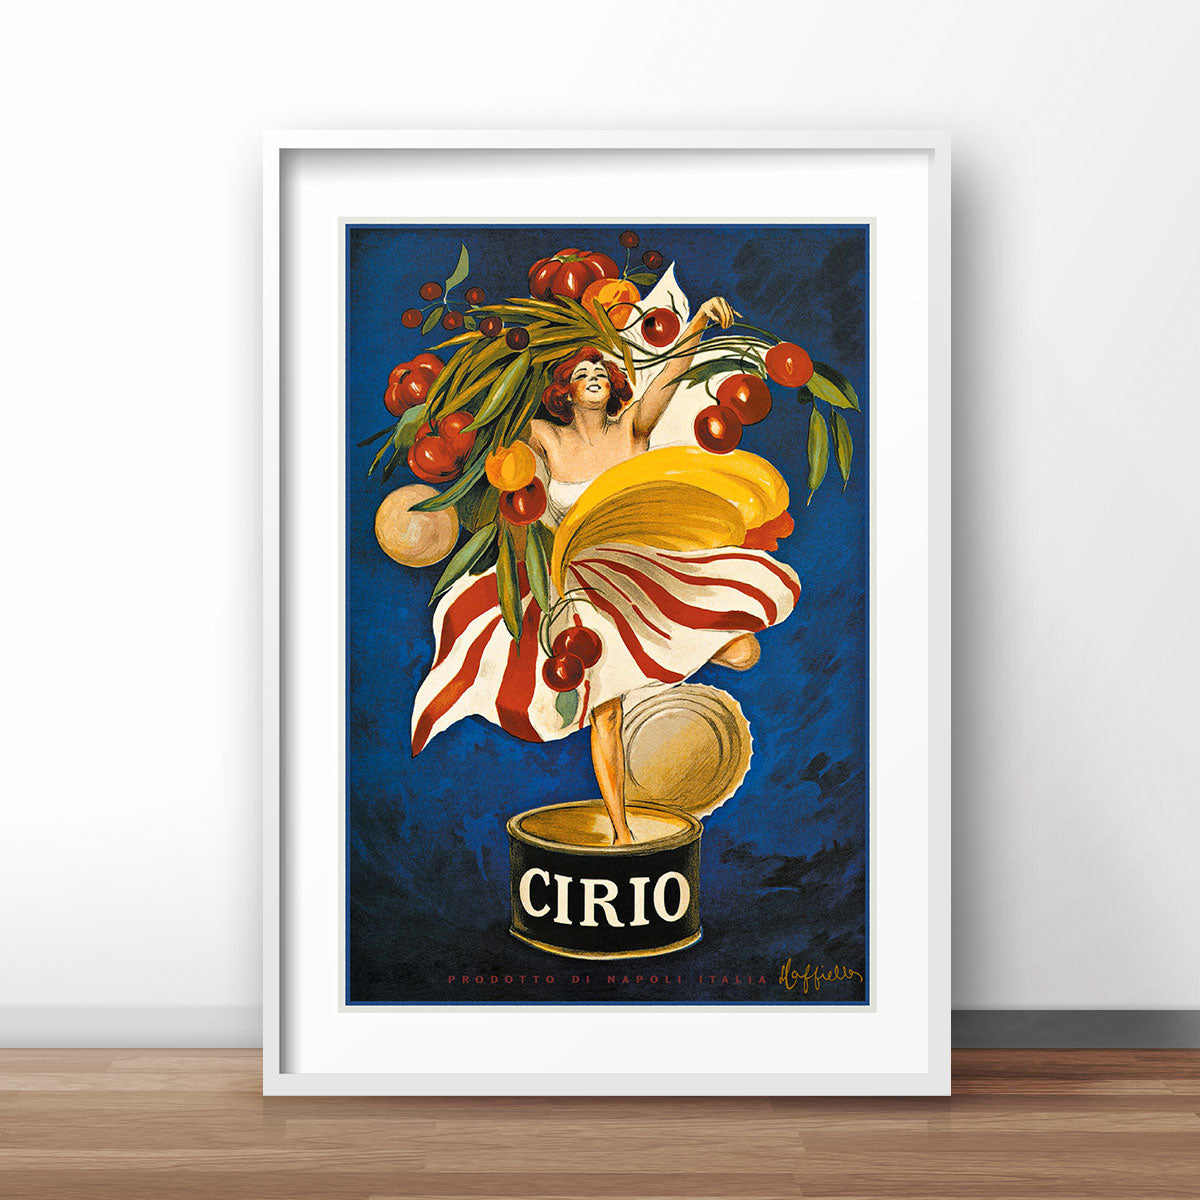 Cirio Italy retro vintage poster print from Places We Luv